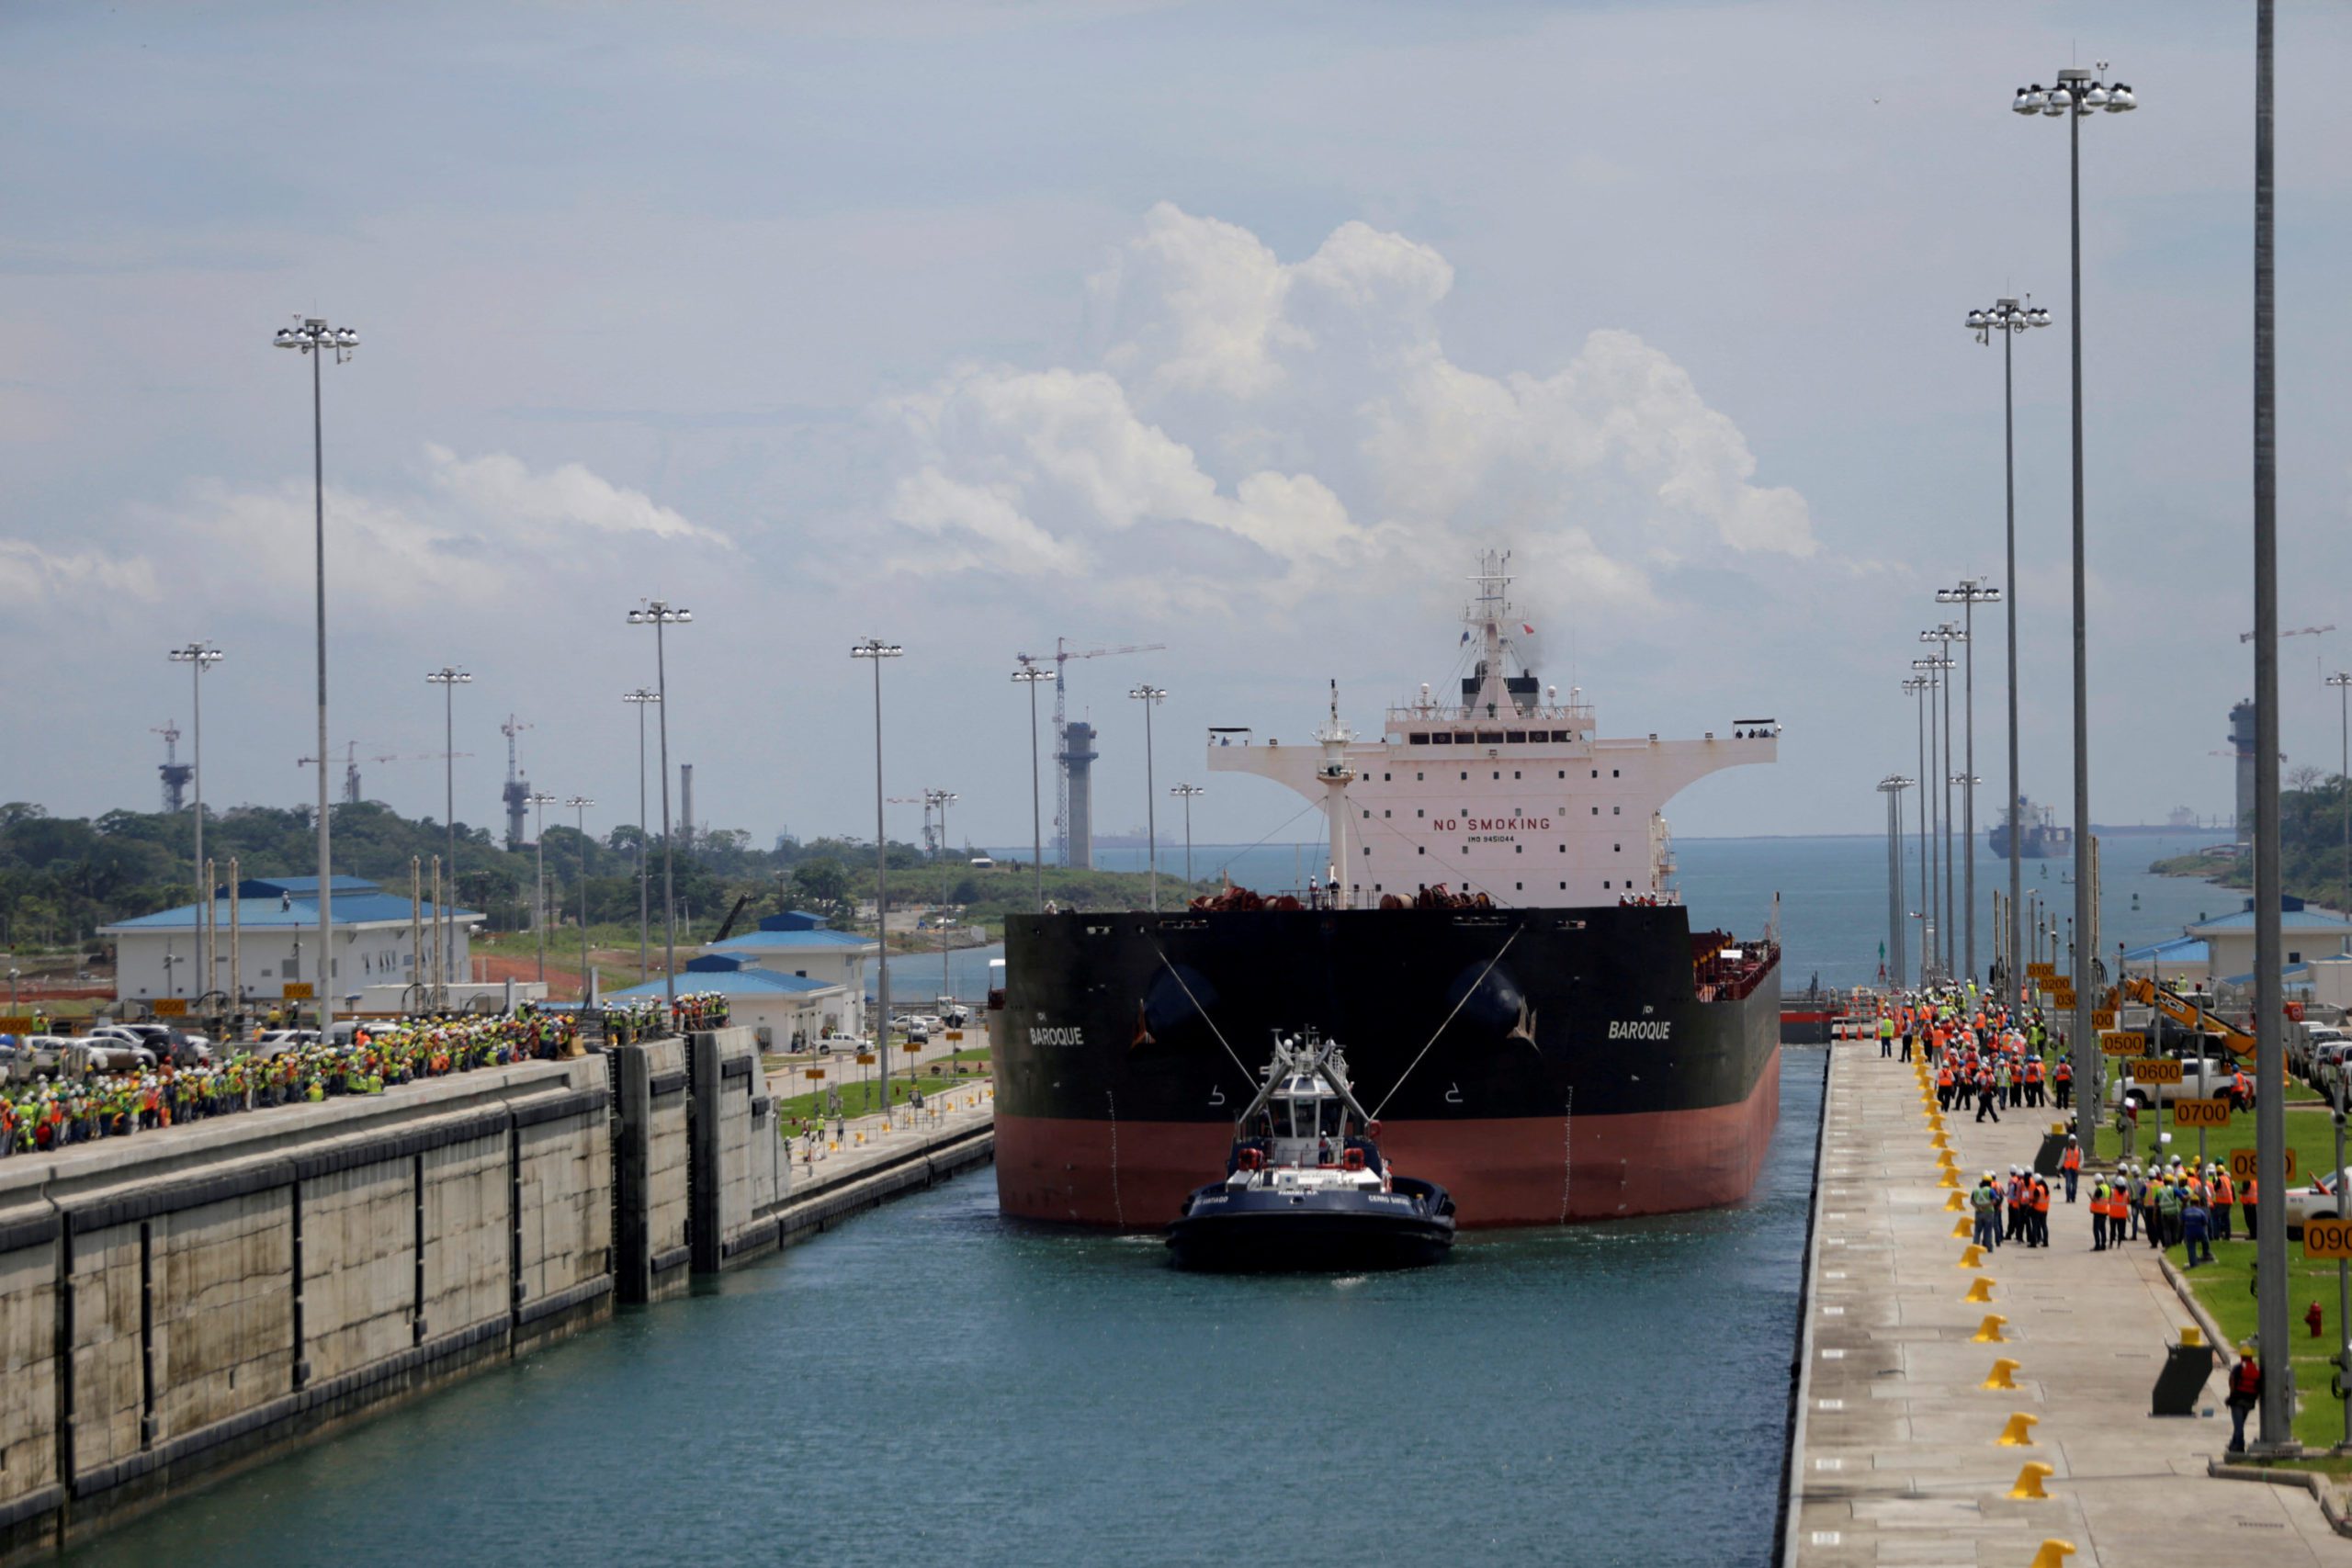 Photo of a post-panamax ship entering the locks in the new panama canal